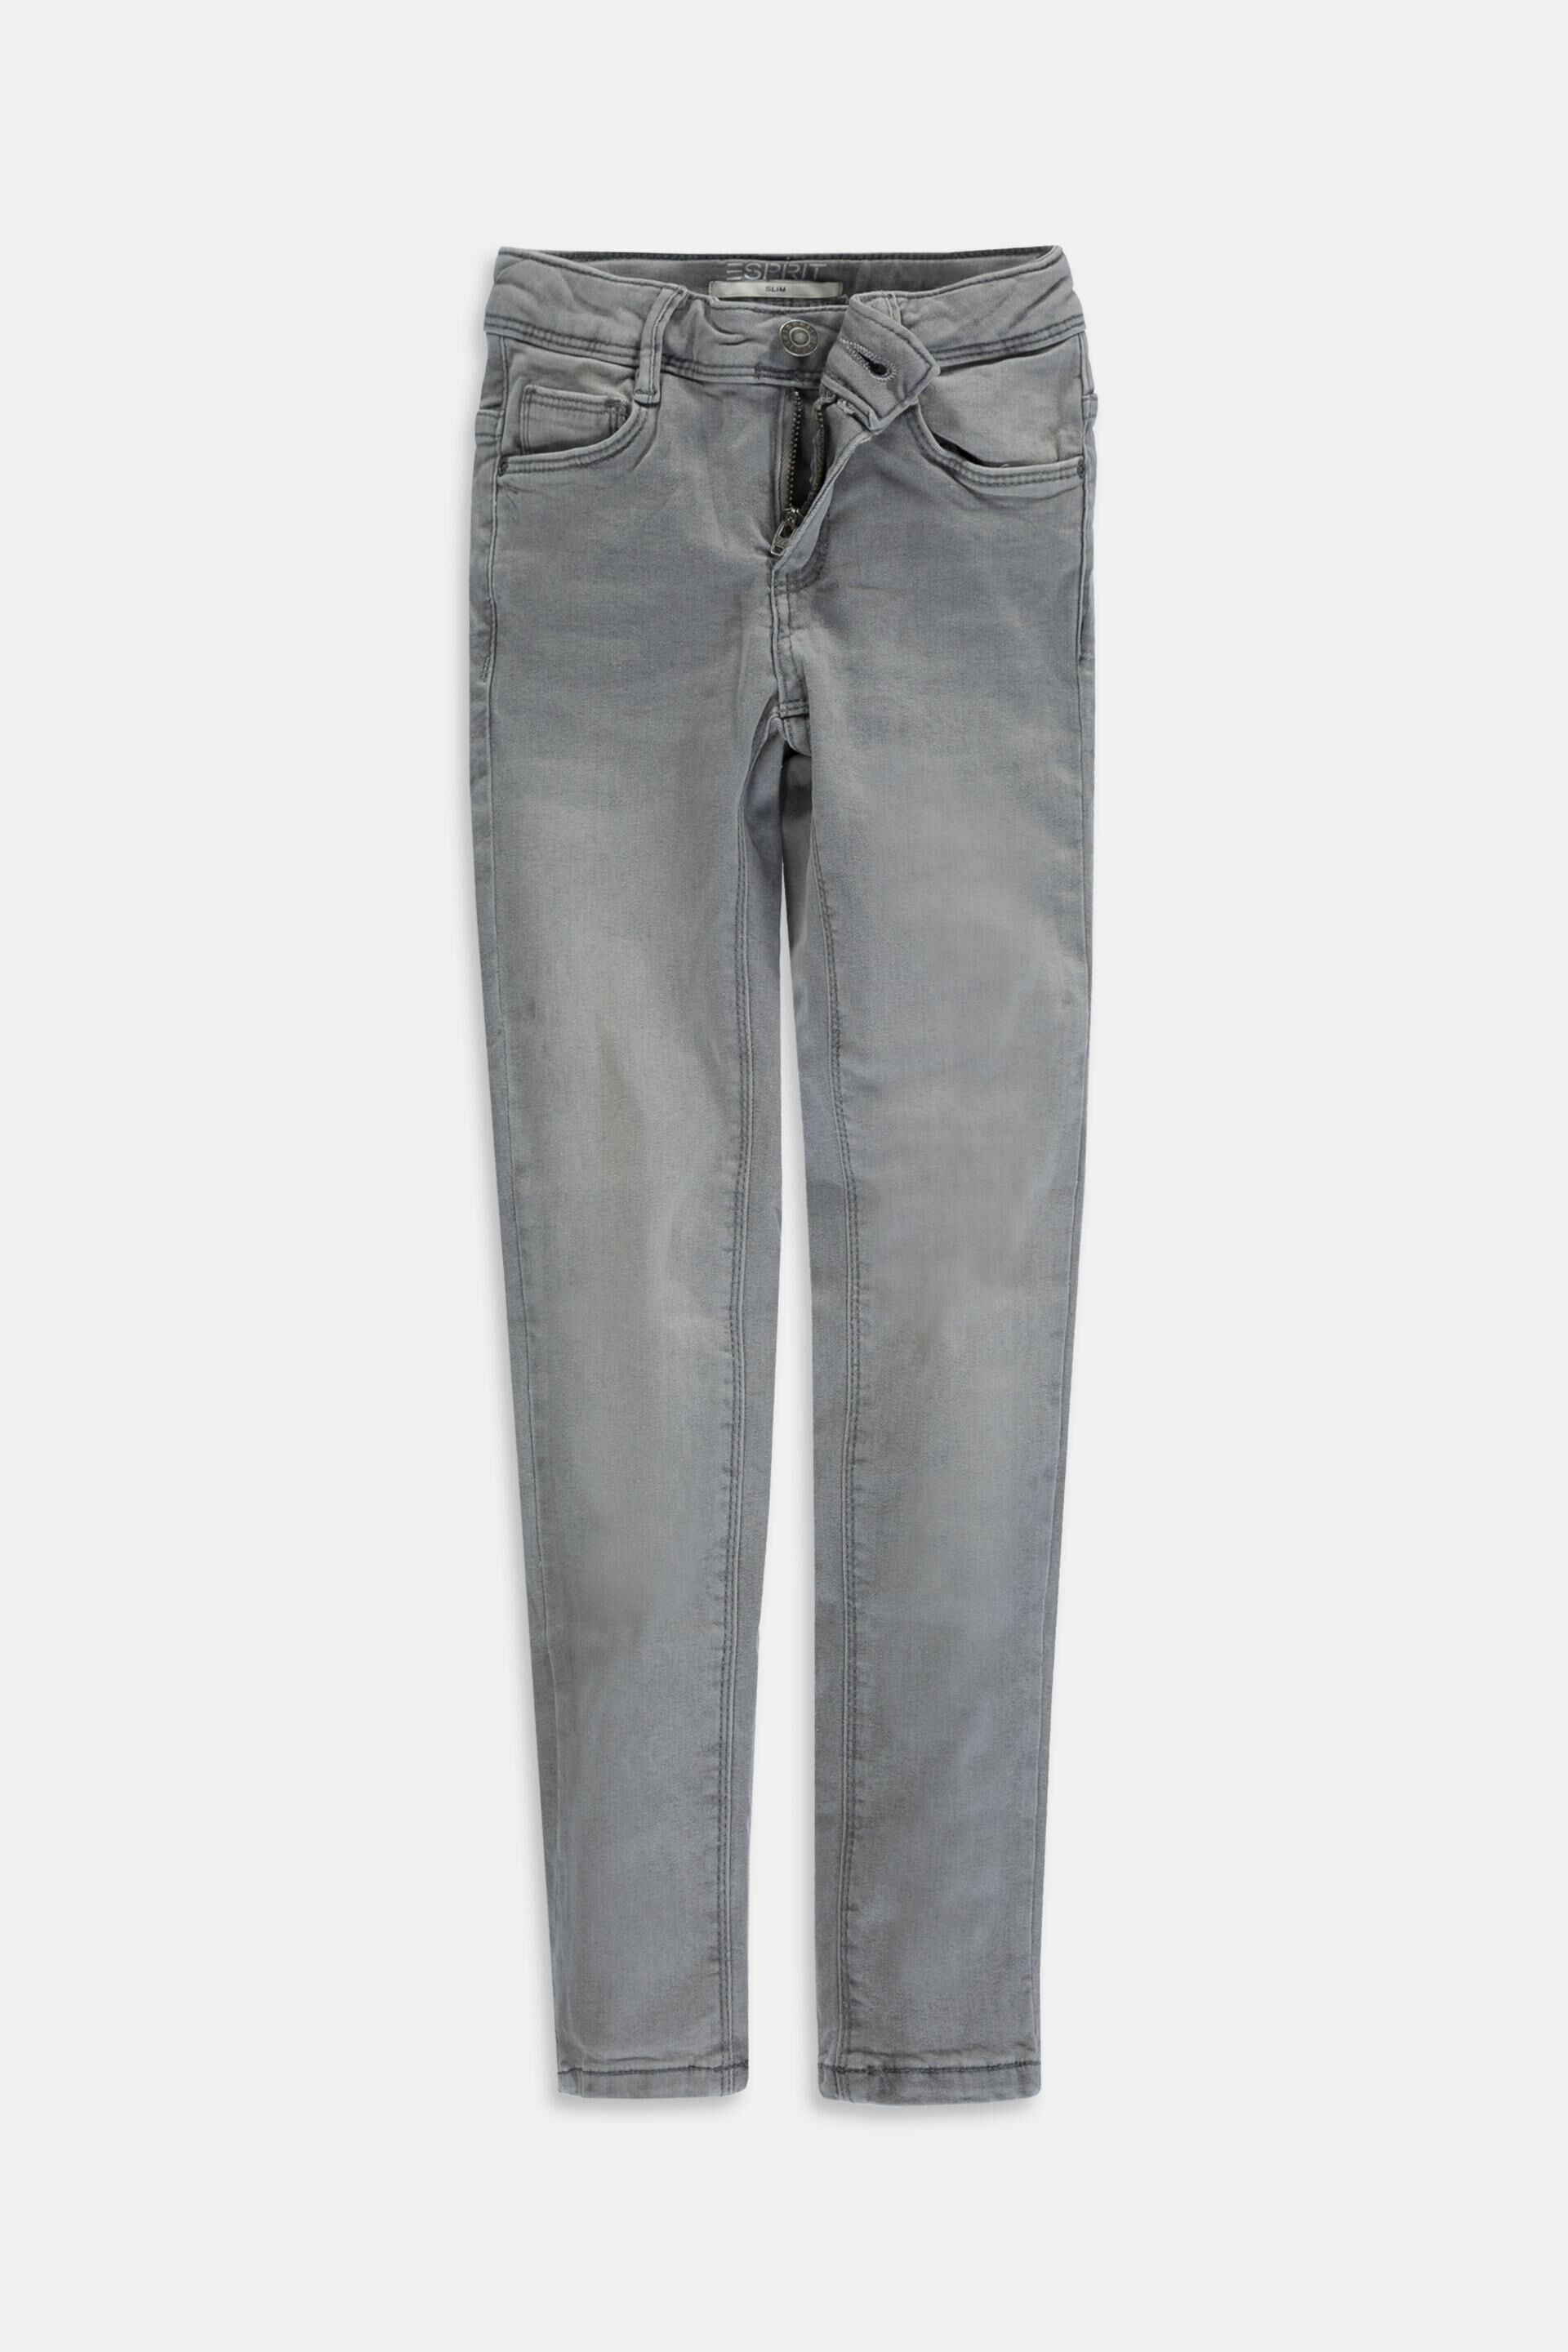 Esprit adjustable with an waistband Jeans